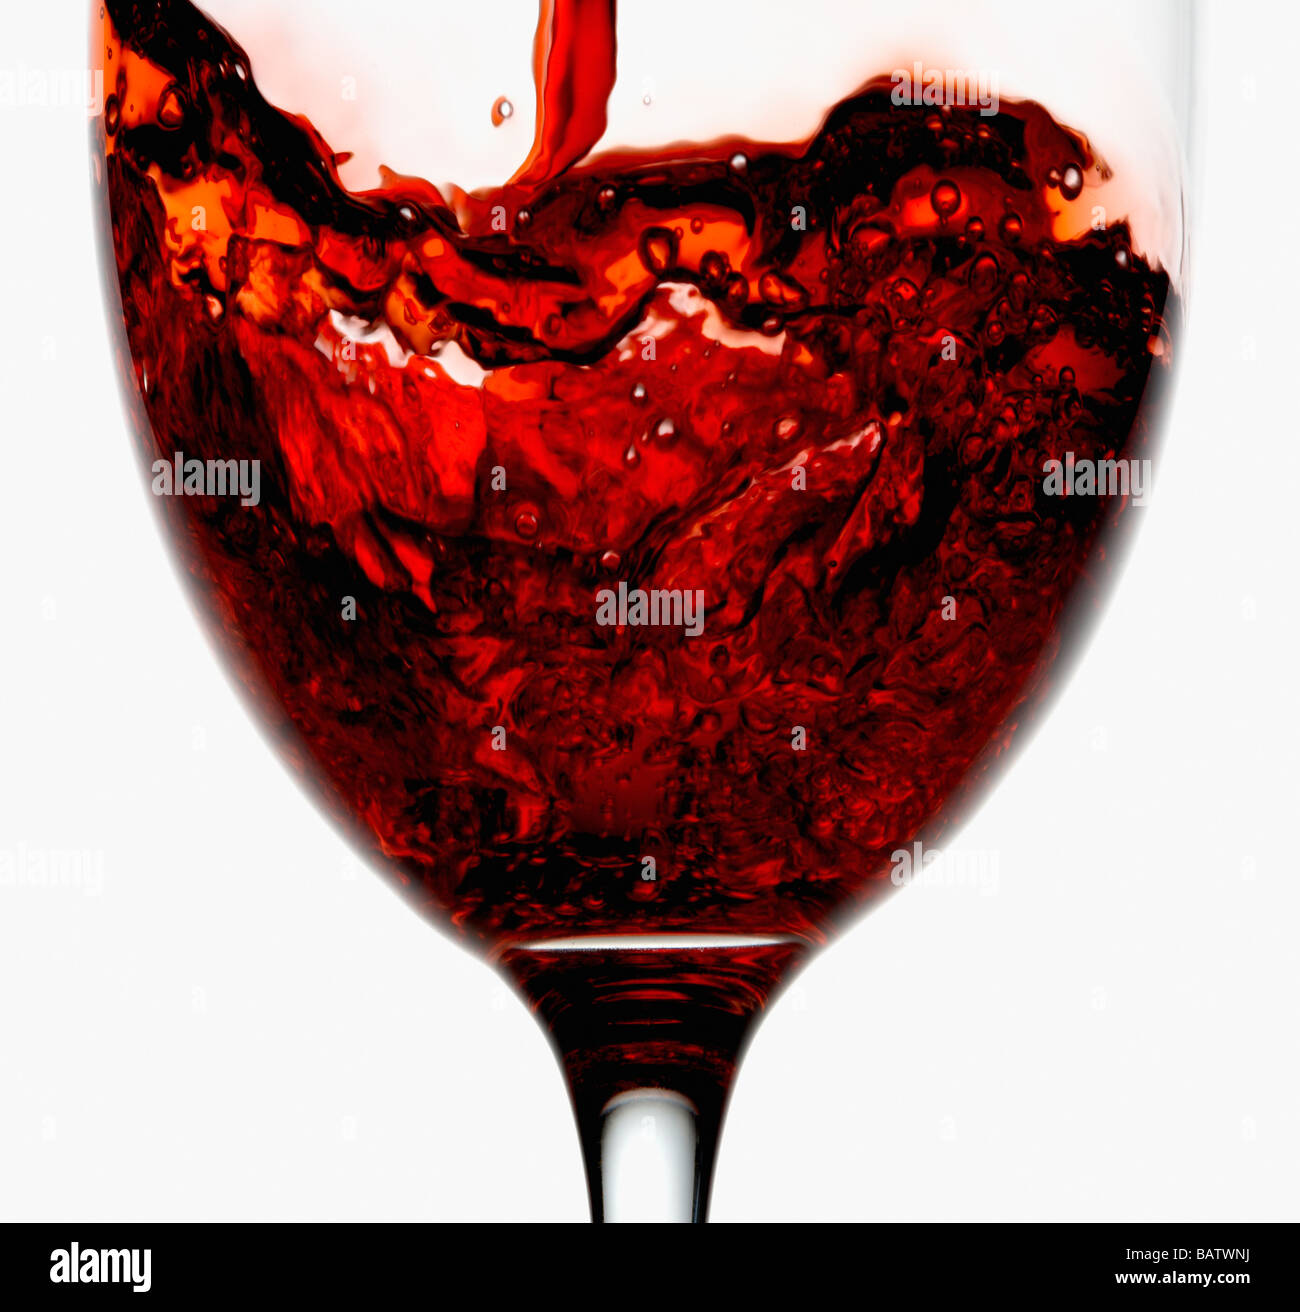 Red wine being poured into wineglass, close-up Stock Photo